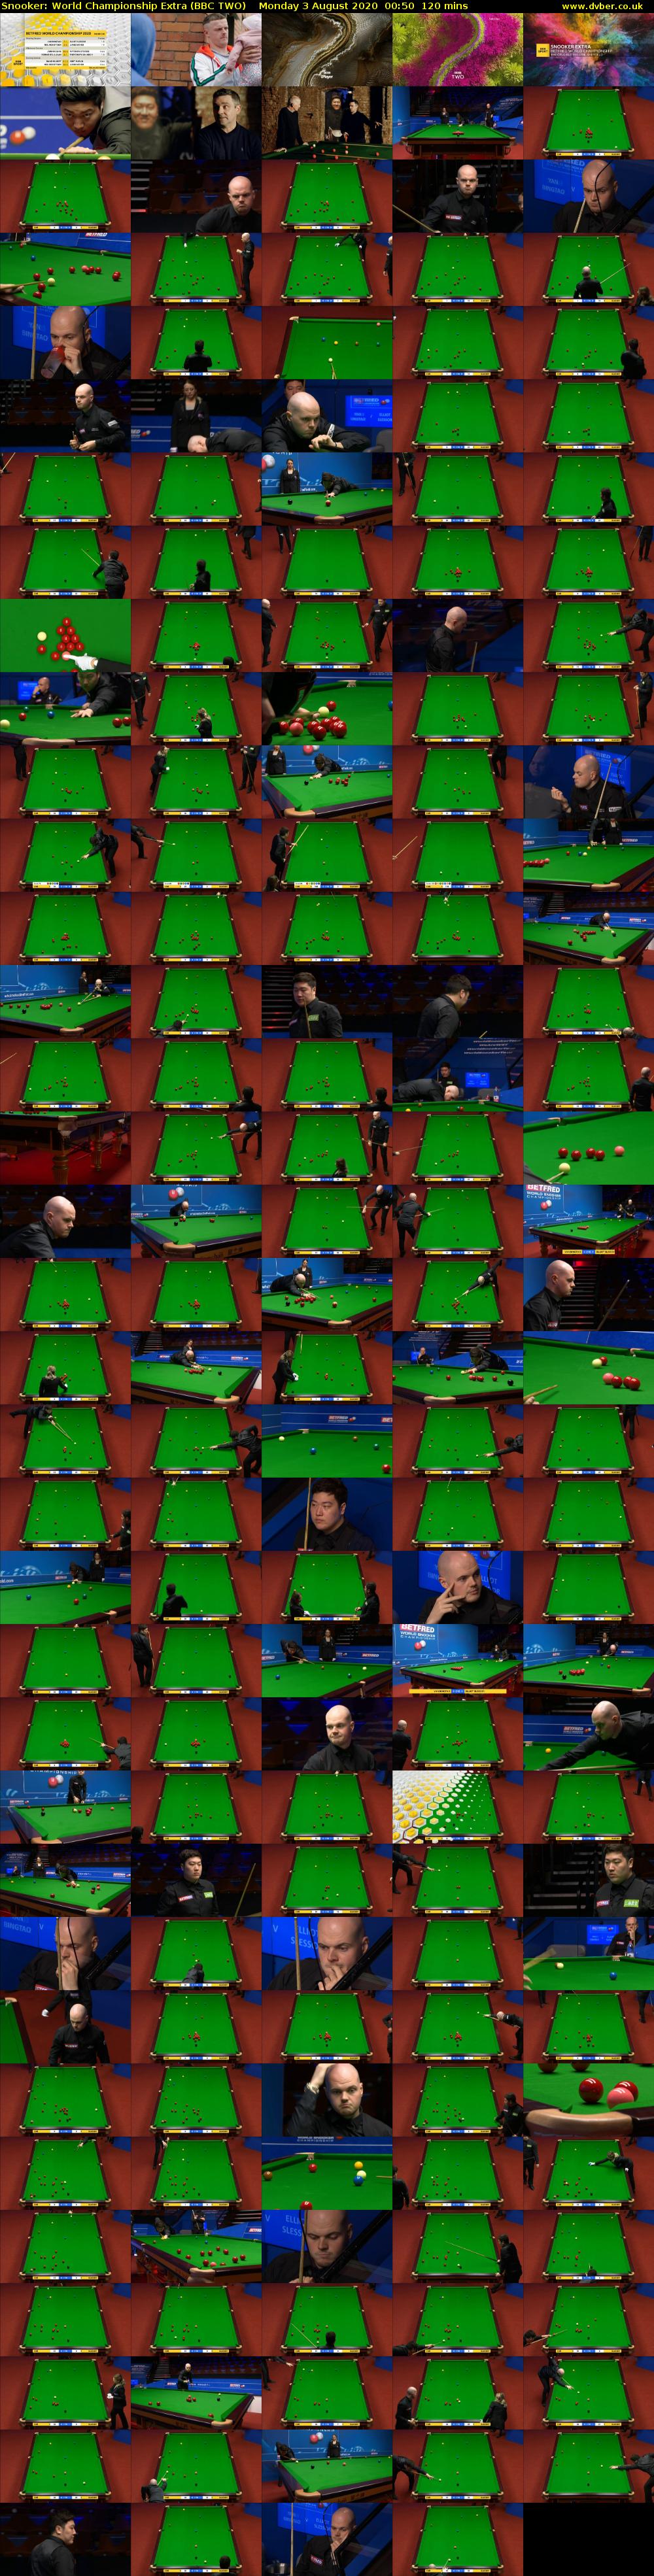 Snooker: World Championship Extra (BBC TWO) Monday 3 August 2020 00:50 - 02:50